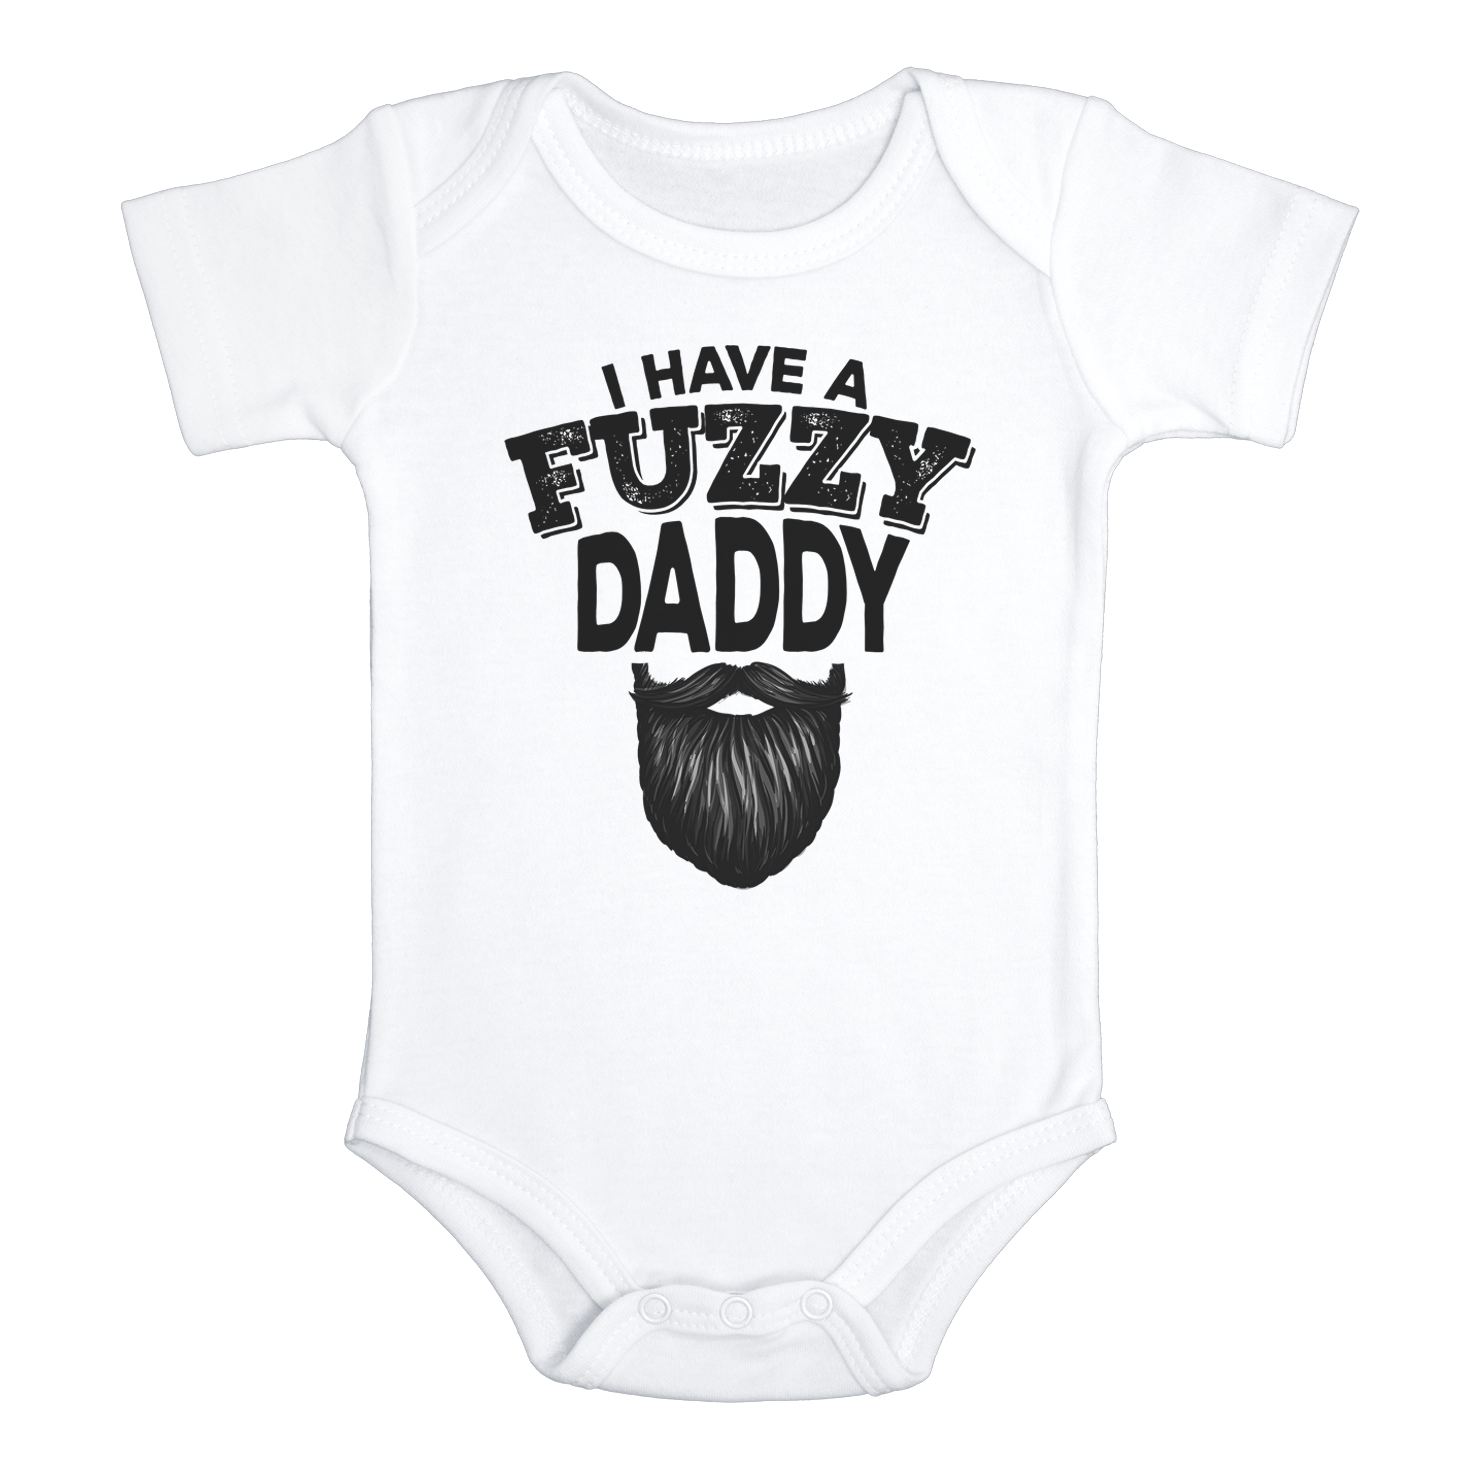 I HAVE A FUZZY DADDY Funny baby onesies beard bodysuit (white: short or long sleeve) - HappyAddition